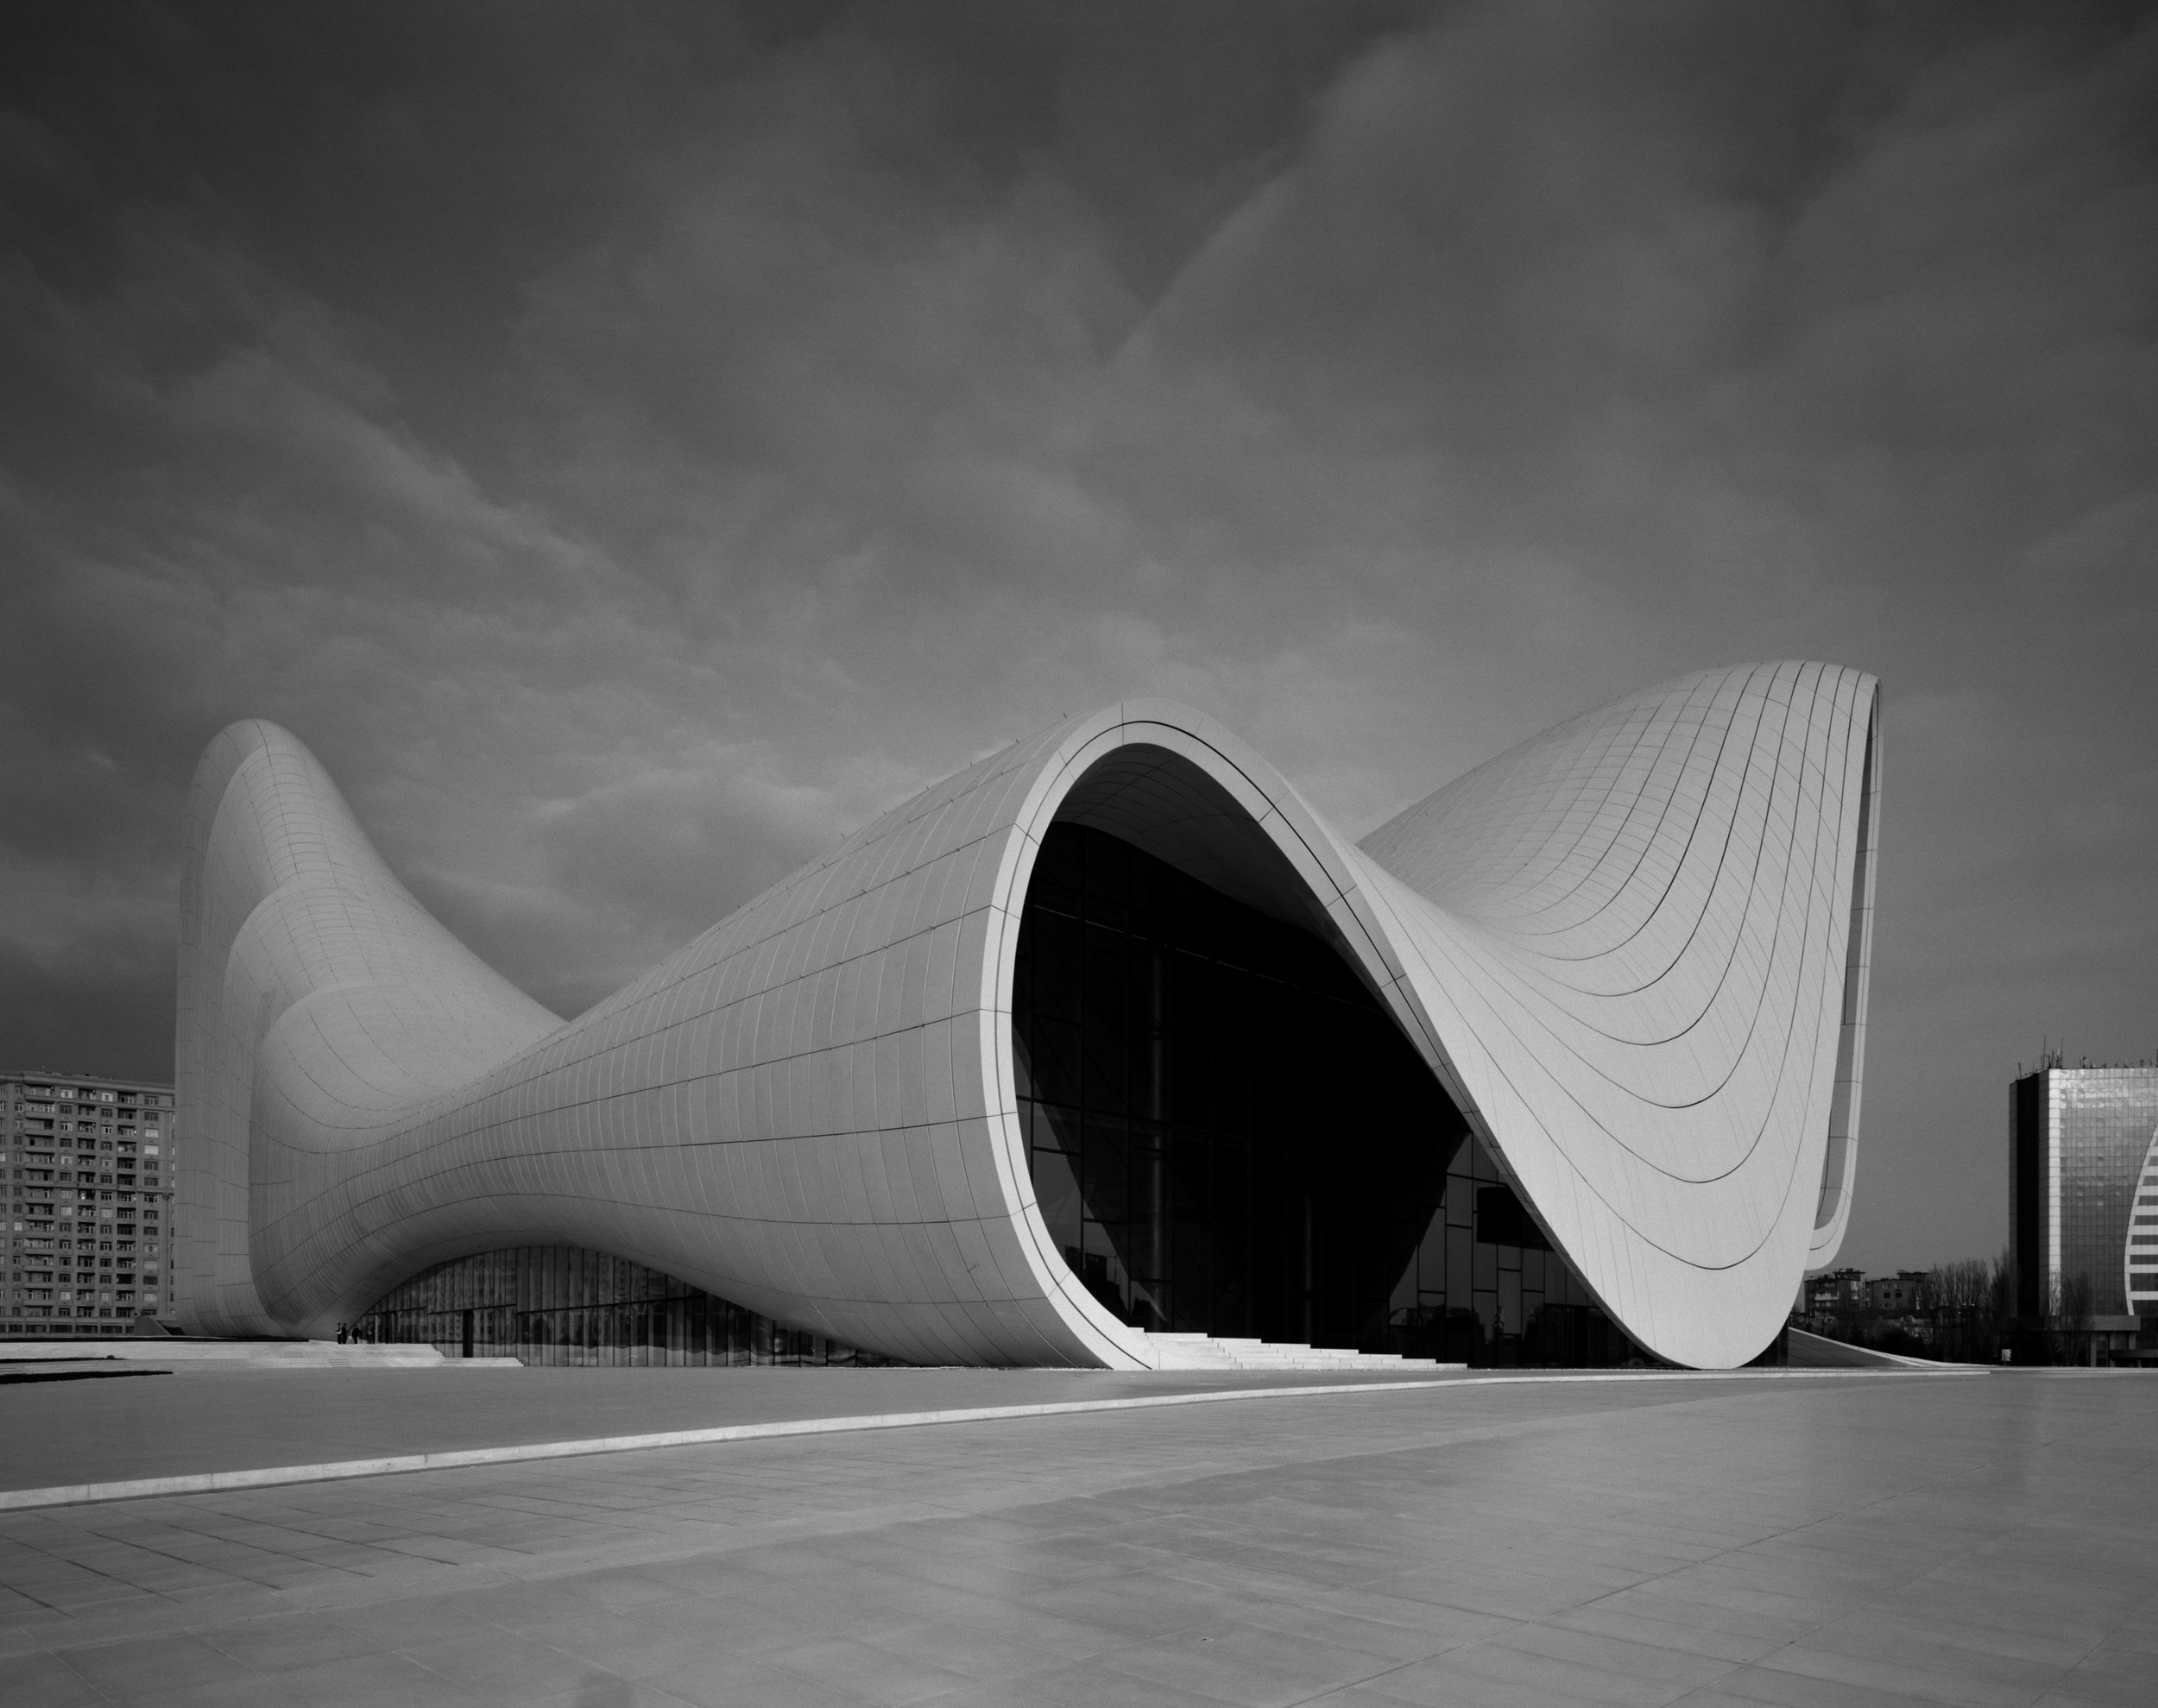 Architecture Photography Tutorial